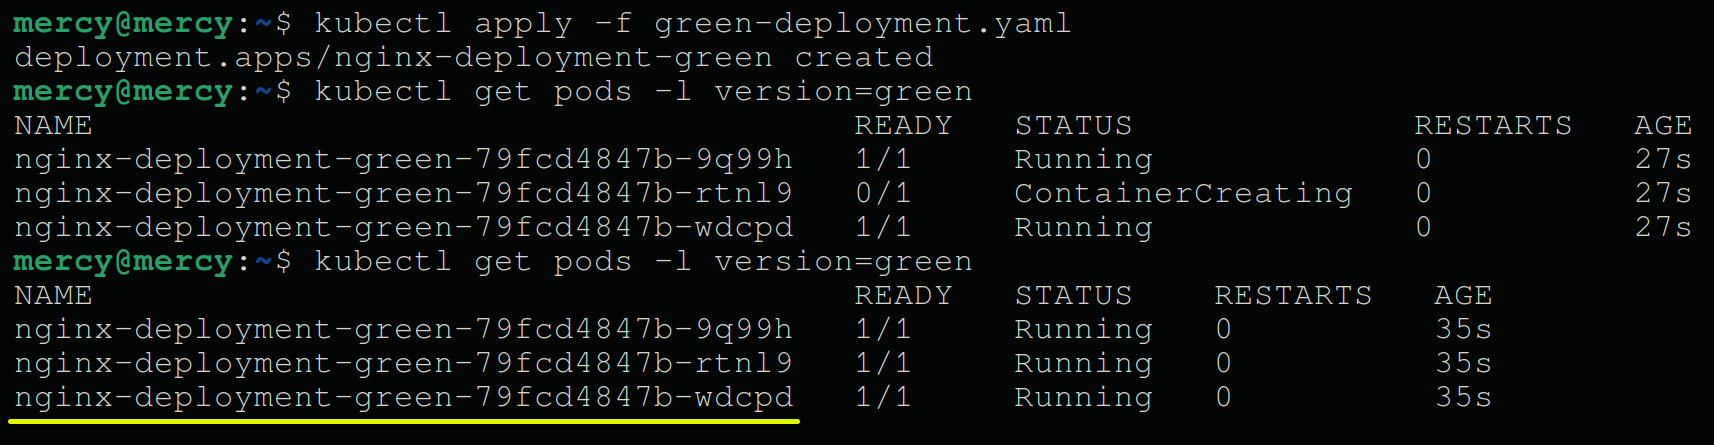 Creating and verifying the green deployment